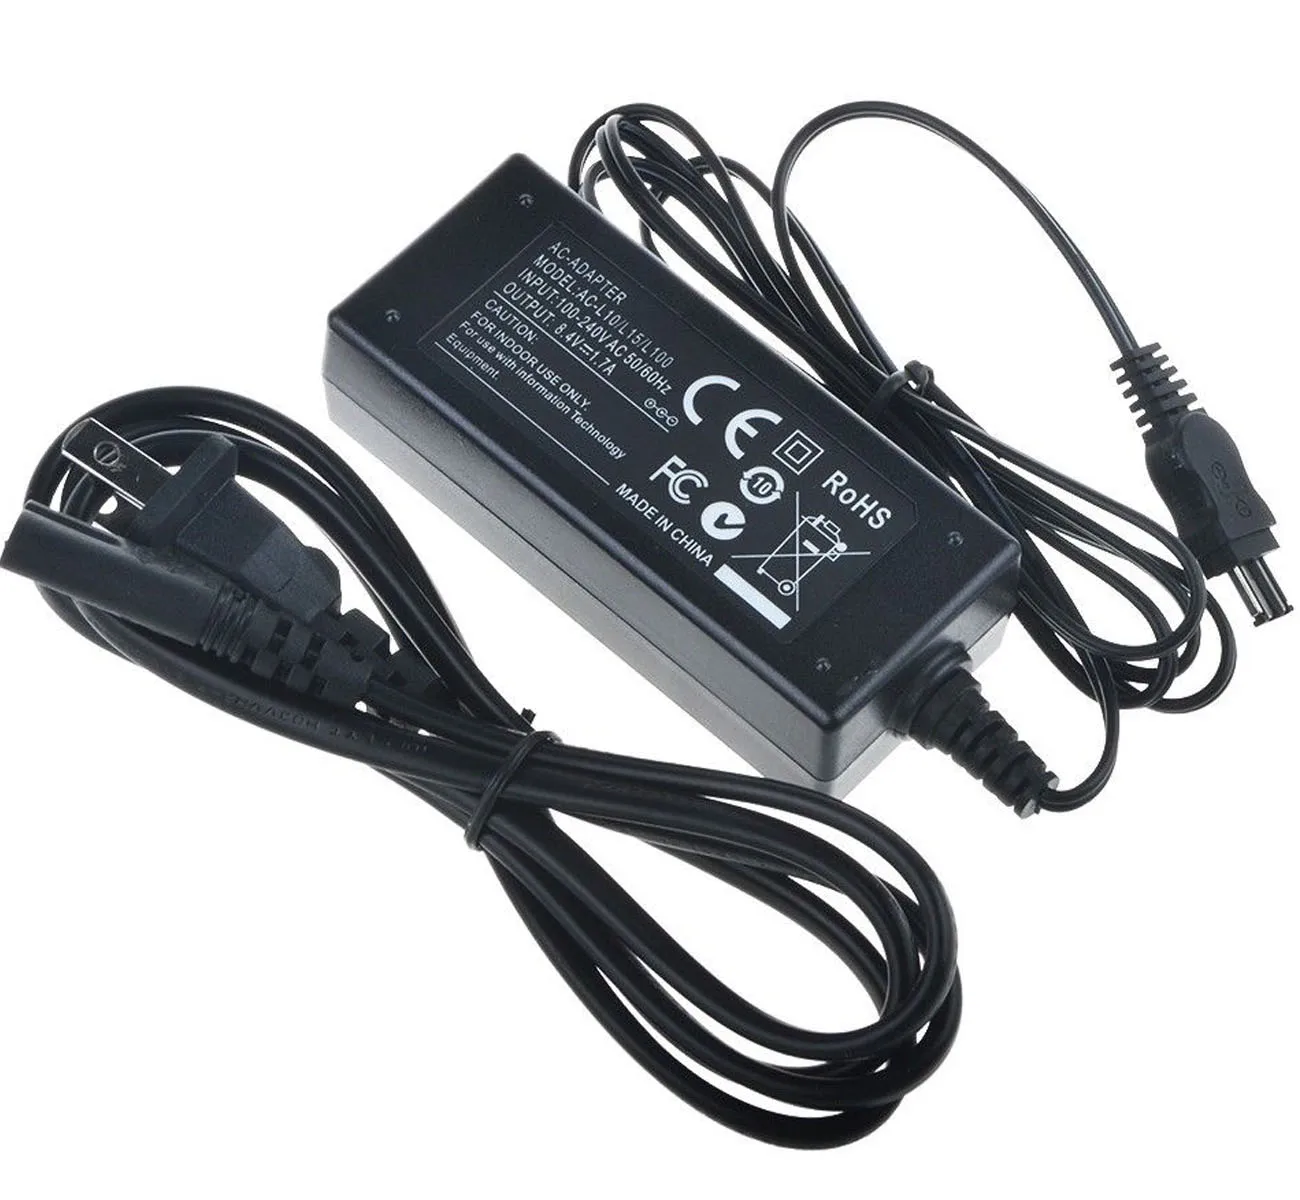 AC Power Adapter Charger for Sony DCR-PC6E, DCR-PC8E, DCR-PC9E, DCR-PC100E,  DCR-PC101E, DCR-PC103E Handycam Camcorder